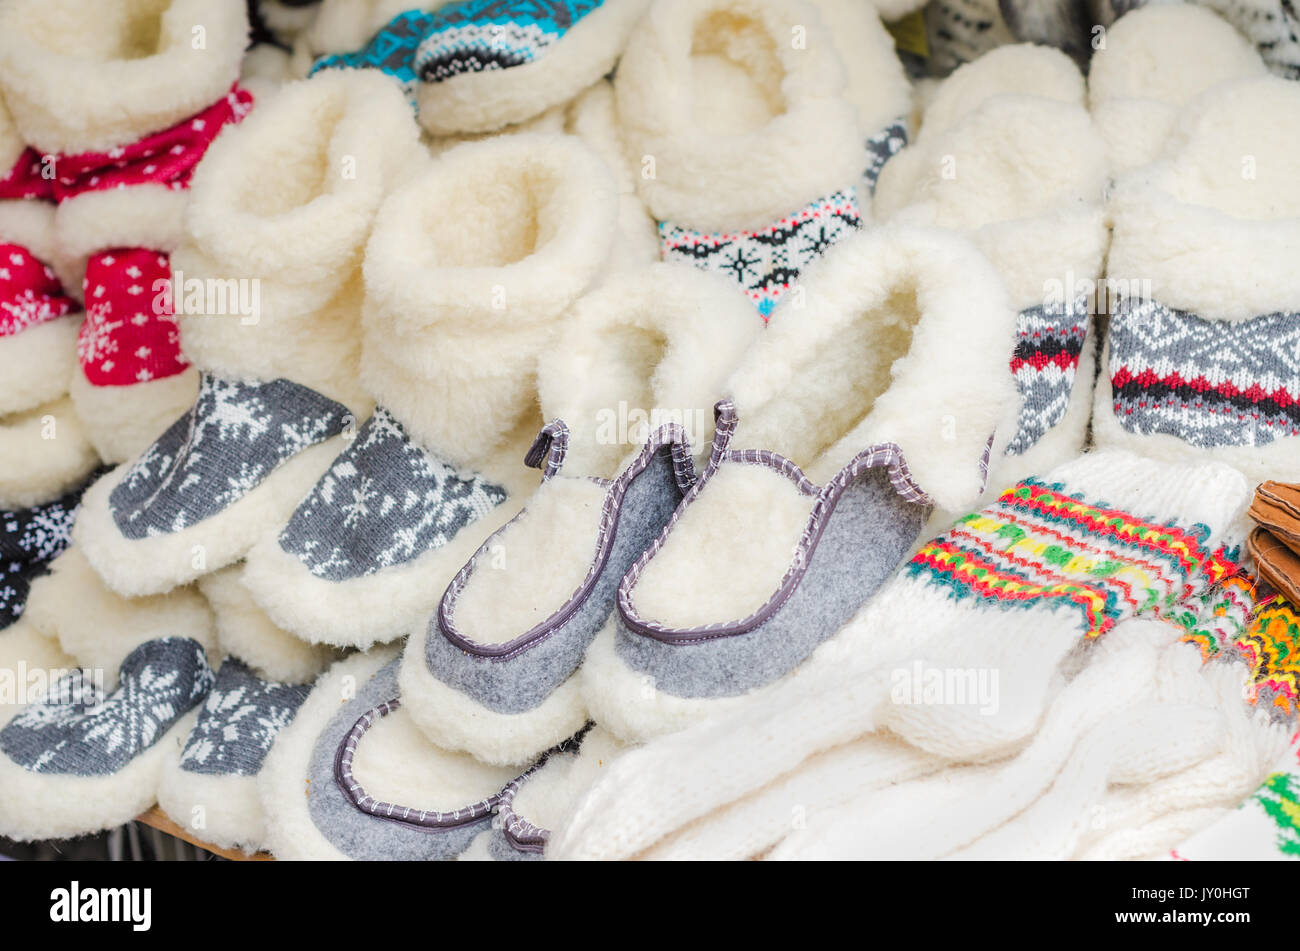 Handmade warm knitted footwear and socks in the market Stock Photo